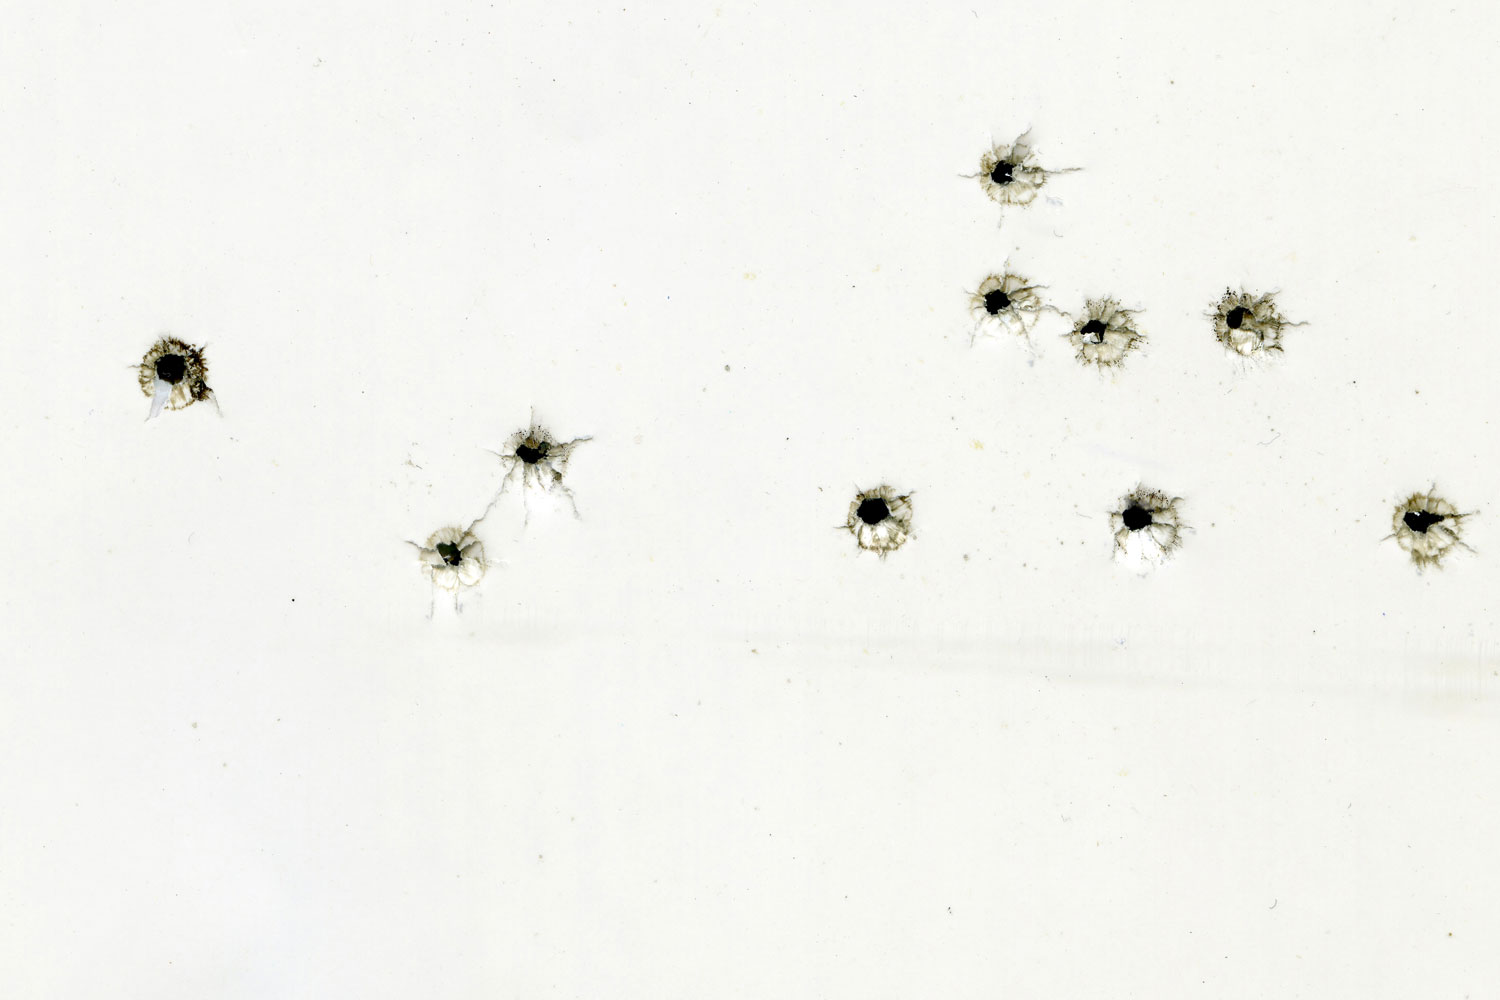 Bullet holes on a white sheet of paper, gunshot damage, abstract background.